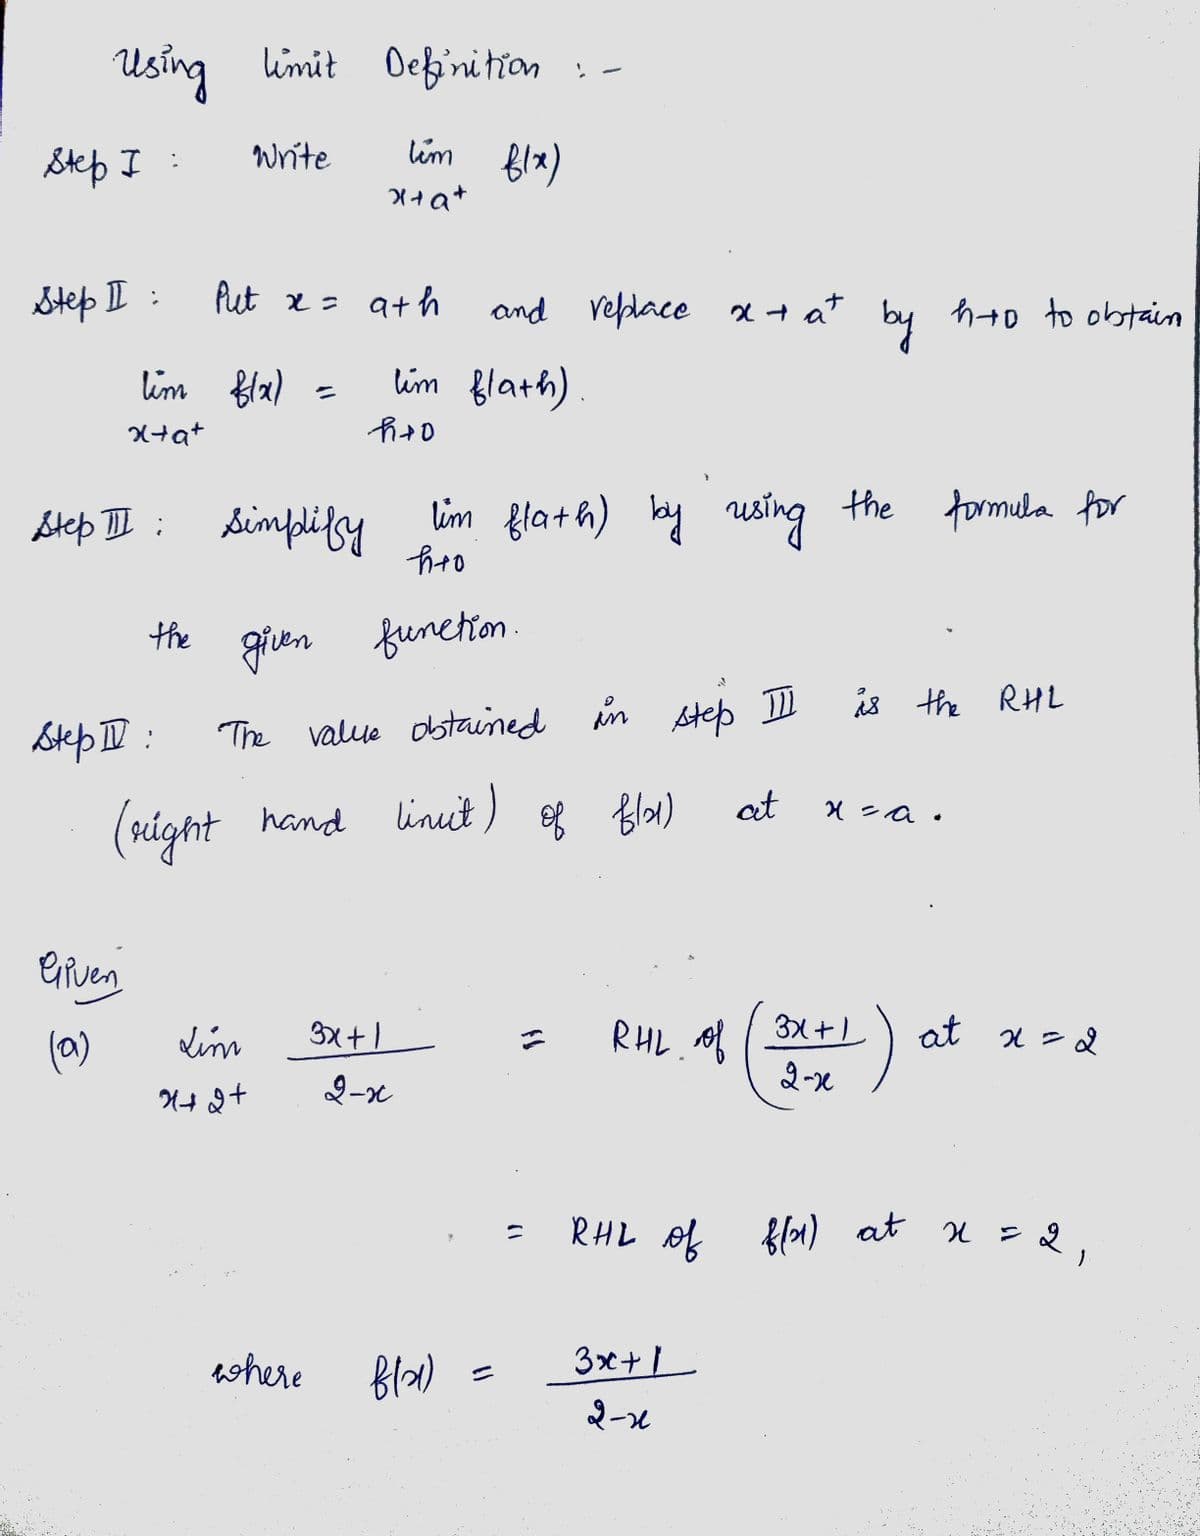 Using limit Definition :-
tim flx)
Step I:
Step II :
lim f(x)
x+a+
the
Step II:
Given
(a)
Write
Step III: Simplify
Put x = 9th
=
x+a+
Lim
X+2+
lim flath) by using the formula for
h+o
given function.
where
h+0
lim flath).
The value obtained in step II
of flat)
(right hand lineit)
and replace x + at by hto to obtain
3x+1
2-x
fla)
C
RHL of
at
3x + 1
2-1
is the RHL
x = a.
3x+1
2-x
at x = 2
RHL of f(x) at x = 2